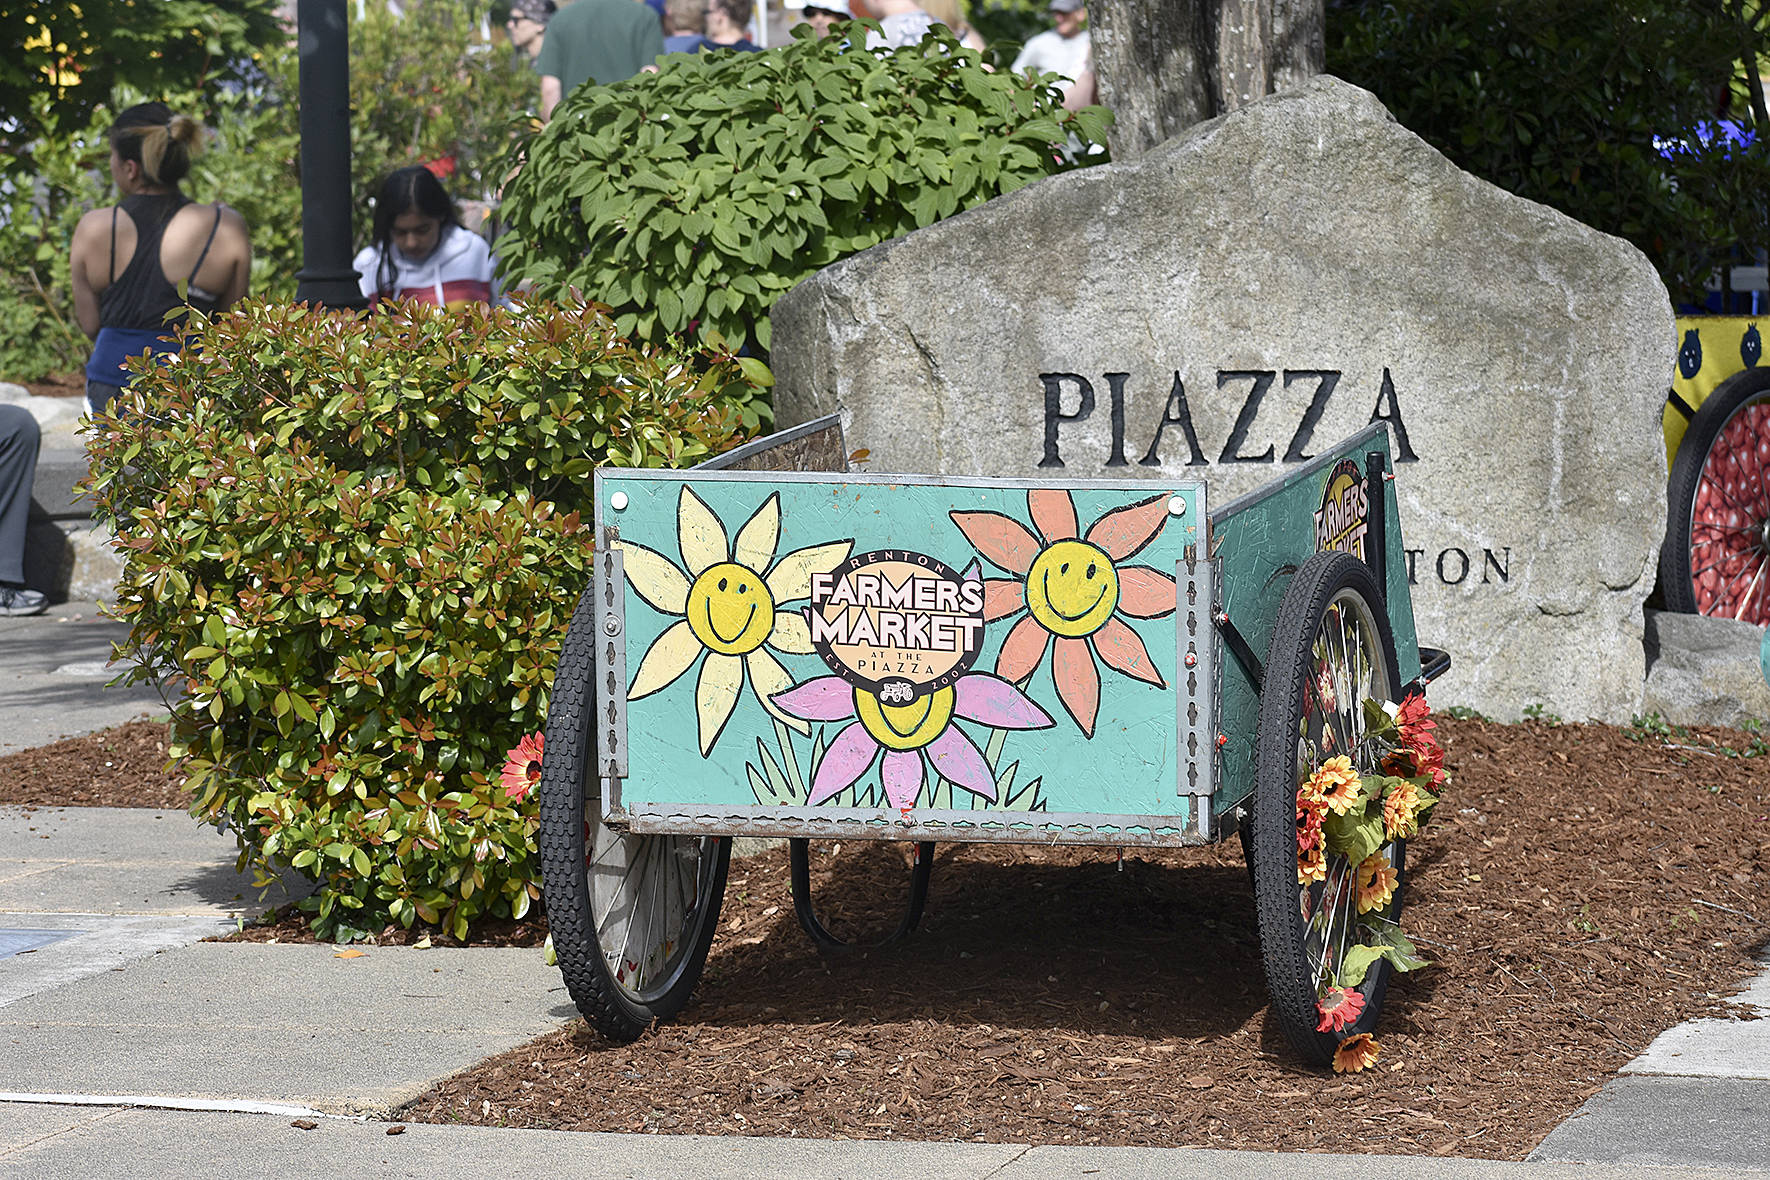 Photo by Haley Ausbun. Renton Farmer’s Market opened for the 2019 season Tuesday, June 4 at Piazza Park. This year the market expands with a larger food truck section across Logan Avenue South, which is now closed during the market to create easy access between the food court and other vendors.